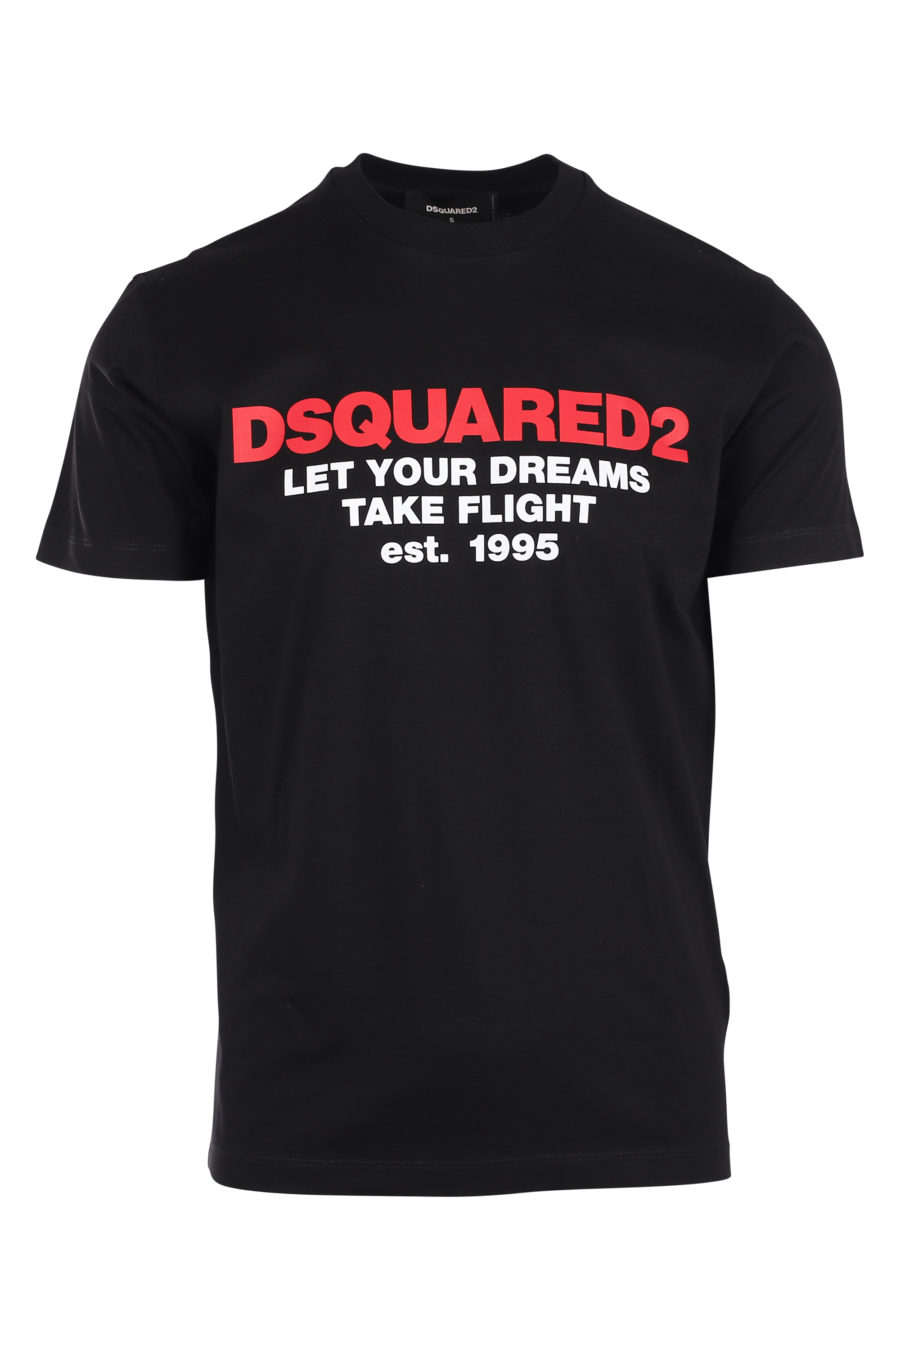 T-shirt black with red logo "let your dreams take flight" - IMG 9861